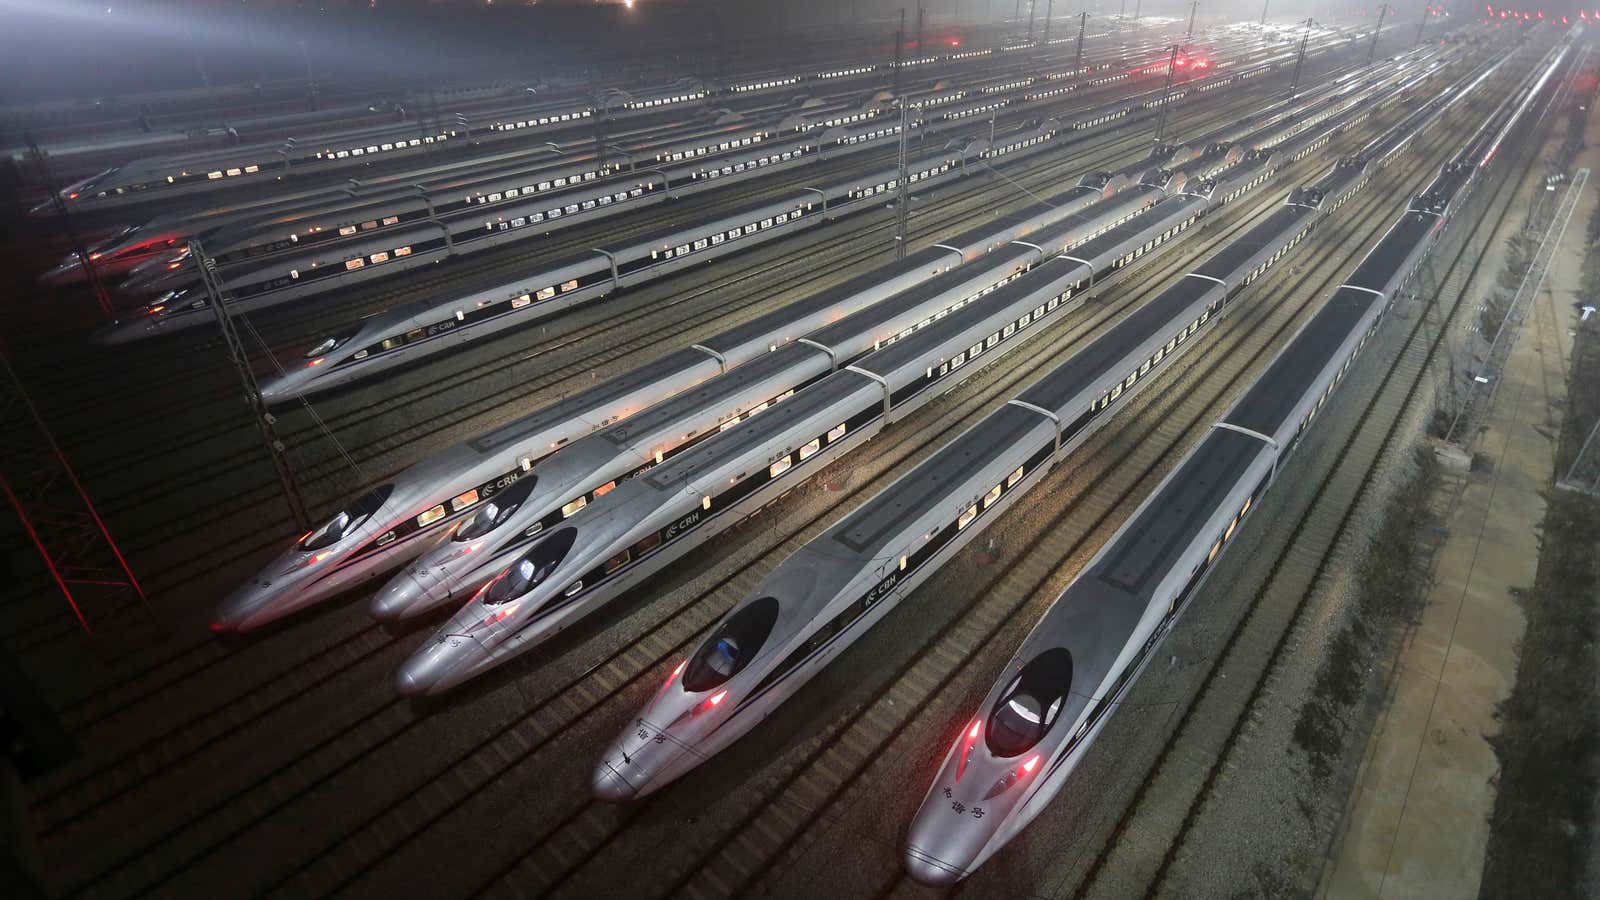 China’s Harmony bullet trains can move.